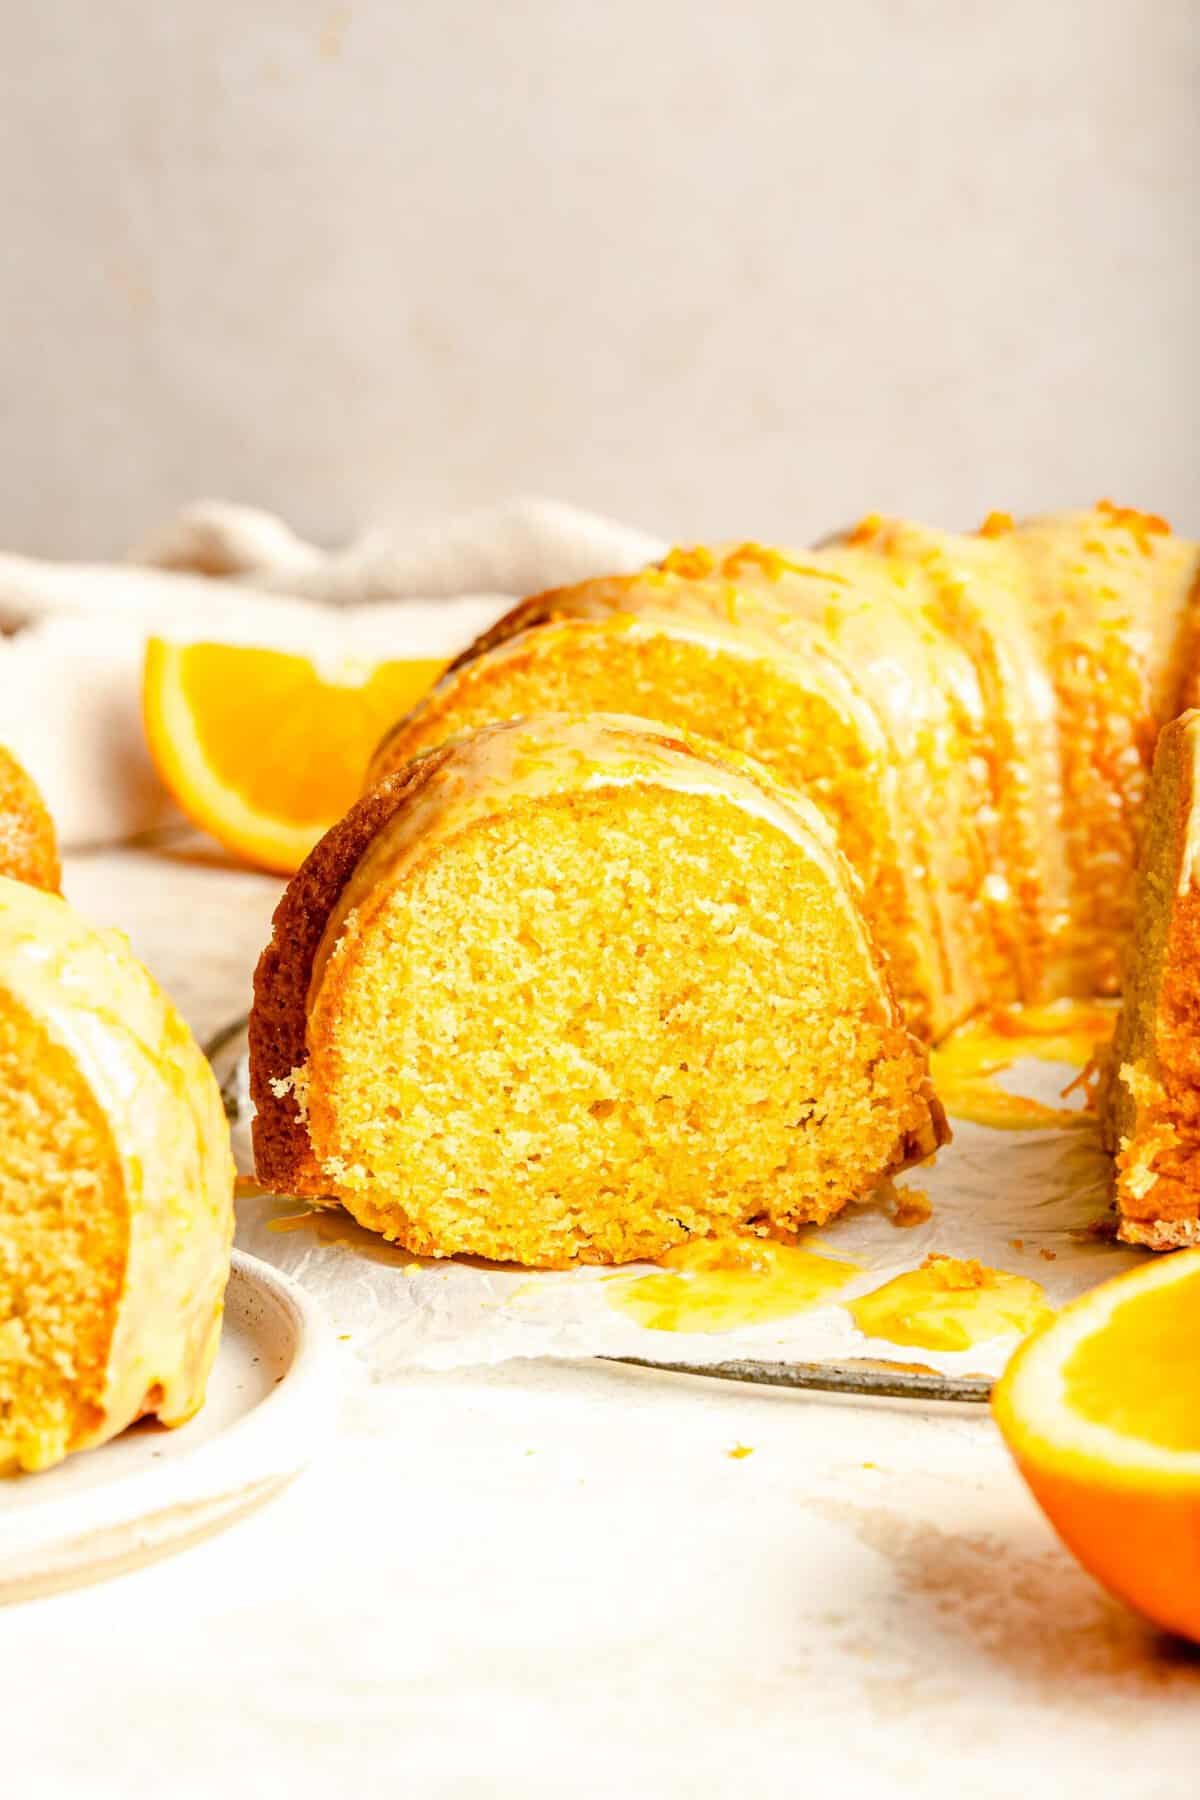 Orange pound cake with a slice taken out of it.